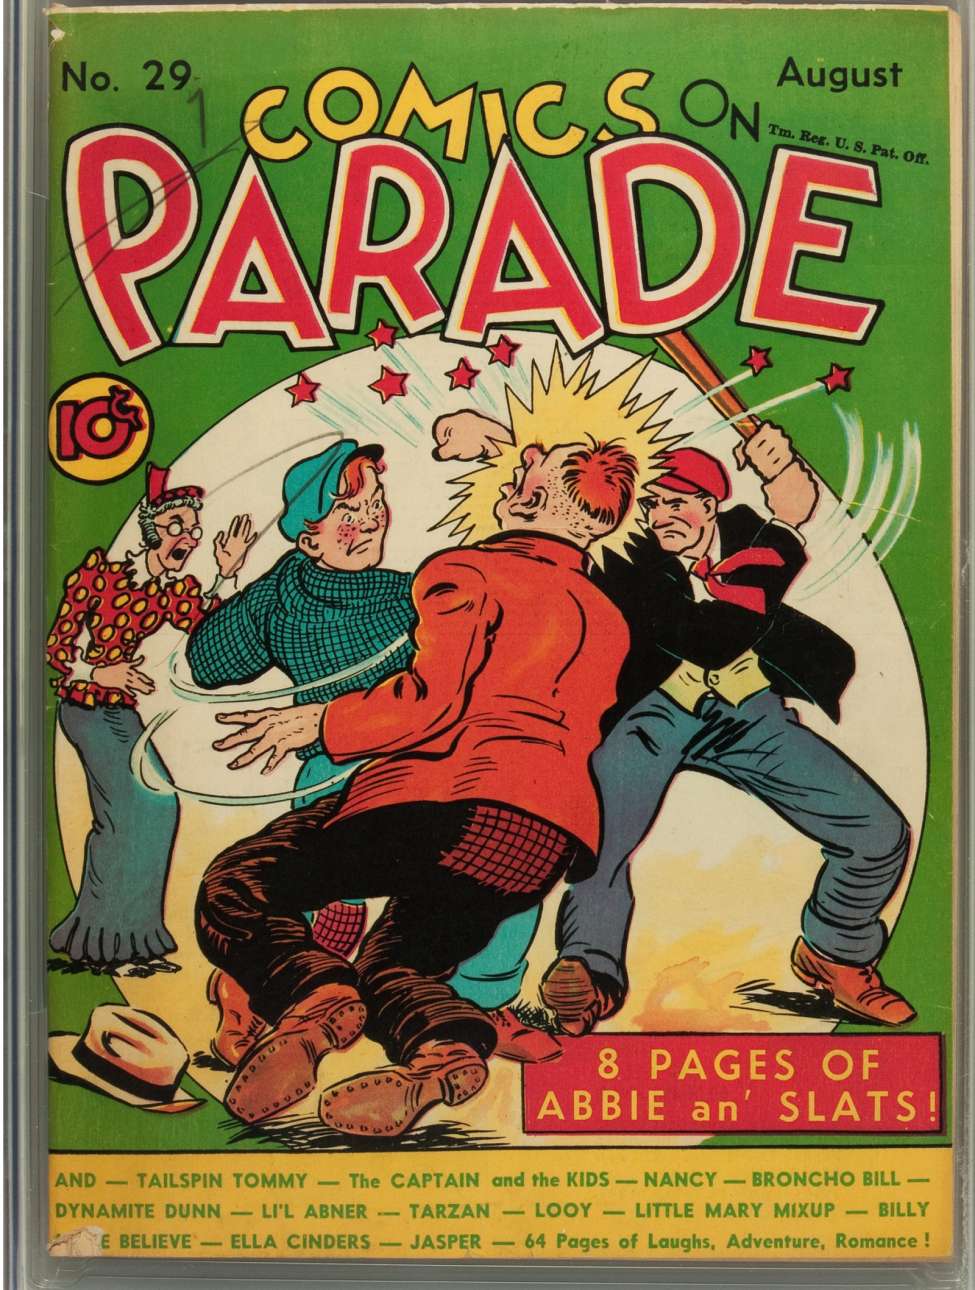 Book Cover For Comics on Parade 29